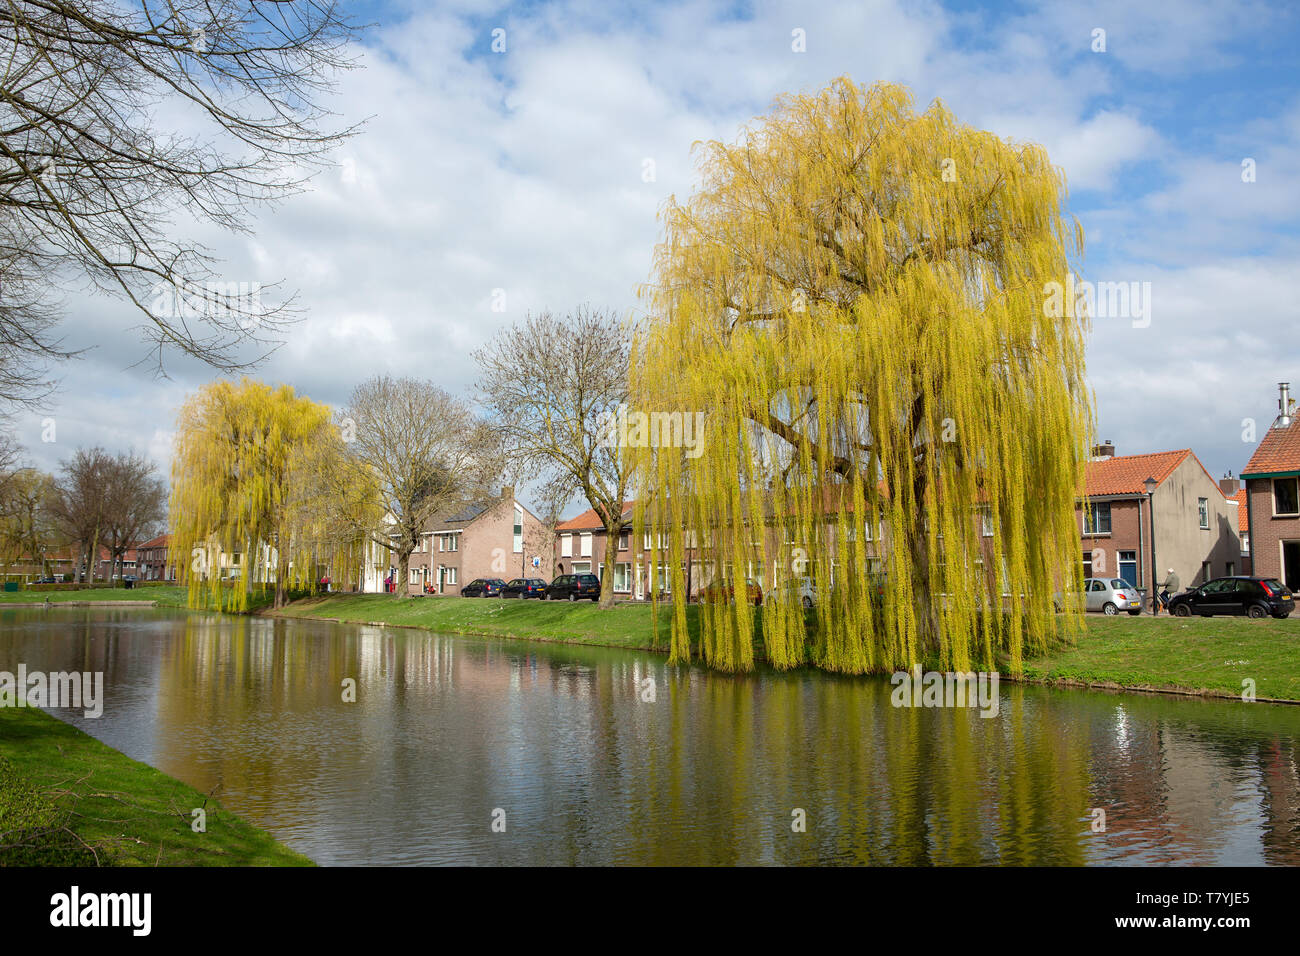 CULEMBORG, MOLENWEG, THE NETHERLANDS - March 27, 2019: Babylon willow or weeping willow - Salix babylonica - in early spring along a canal. Stock Photo